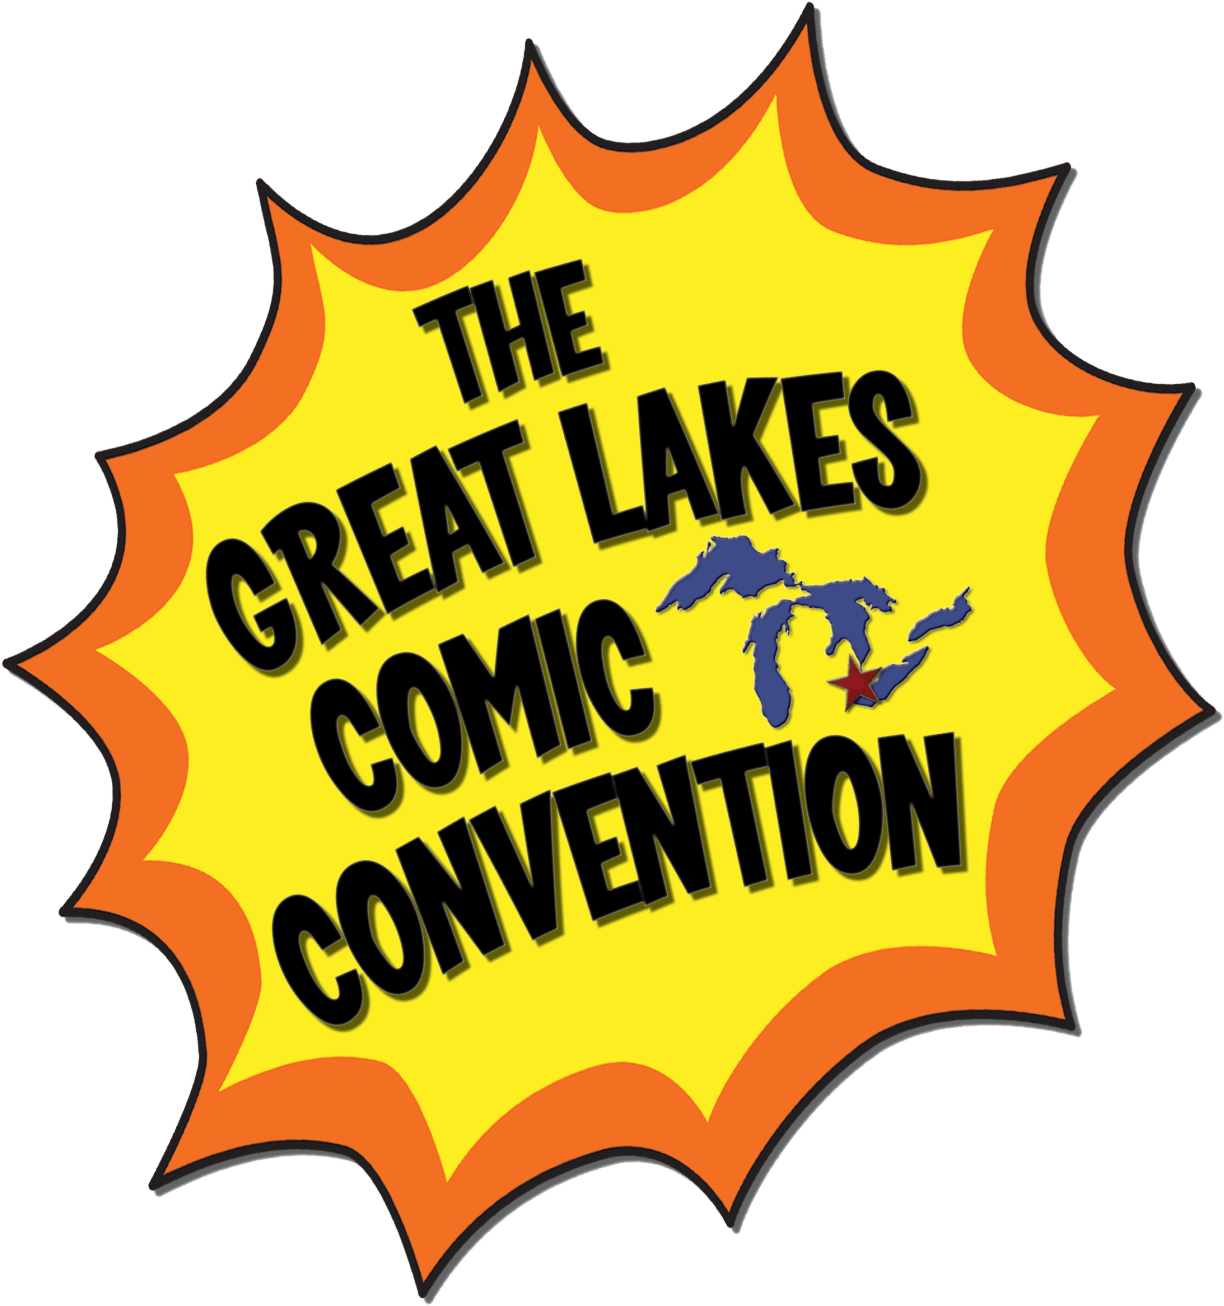 The Great Lakes Comic Convention - Great Lakes (1400x1400)